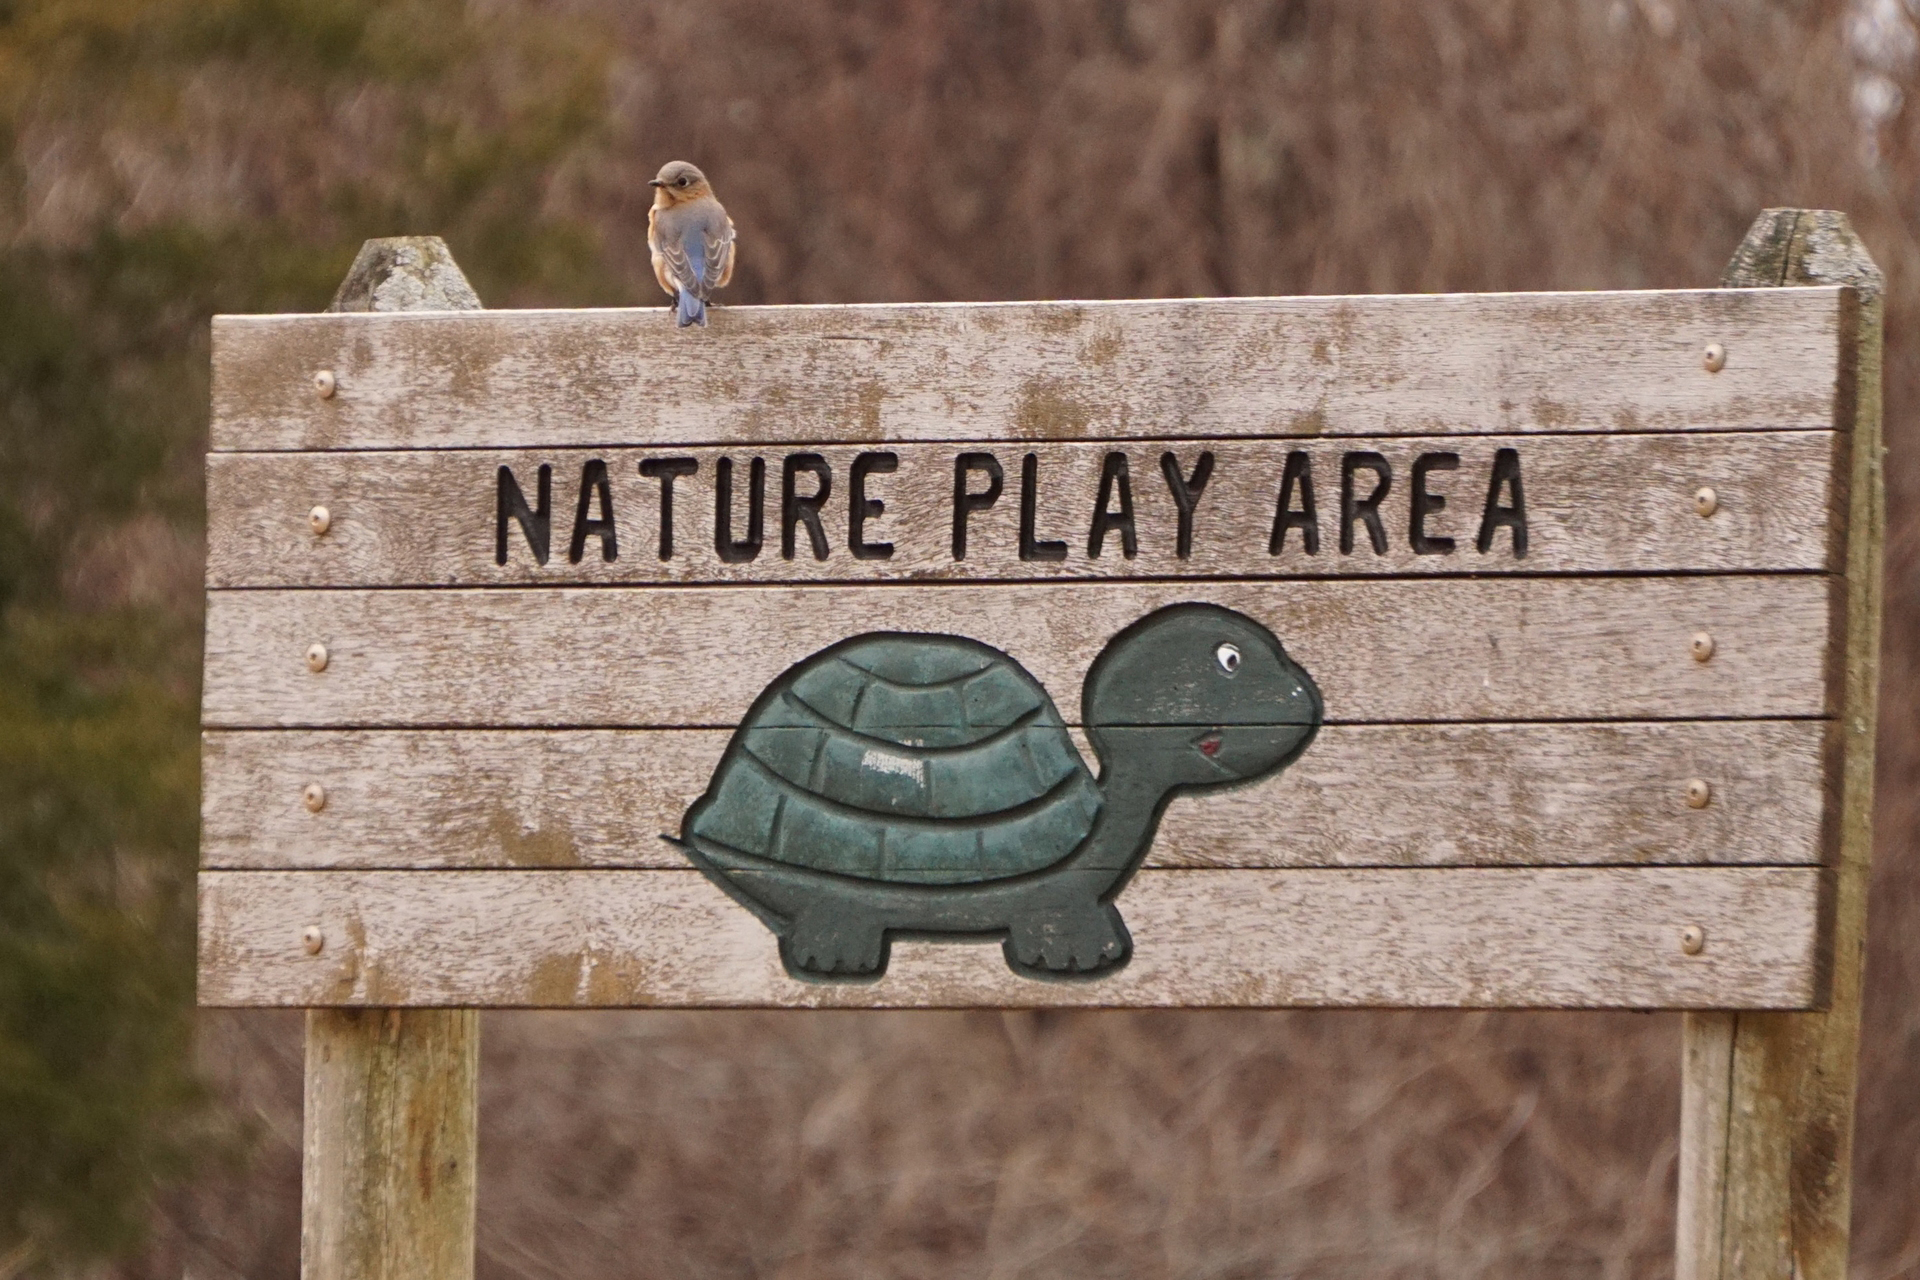 Bird perched on a sign reading "Nature Play Area"